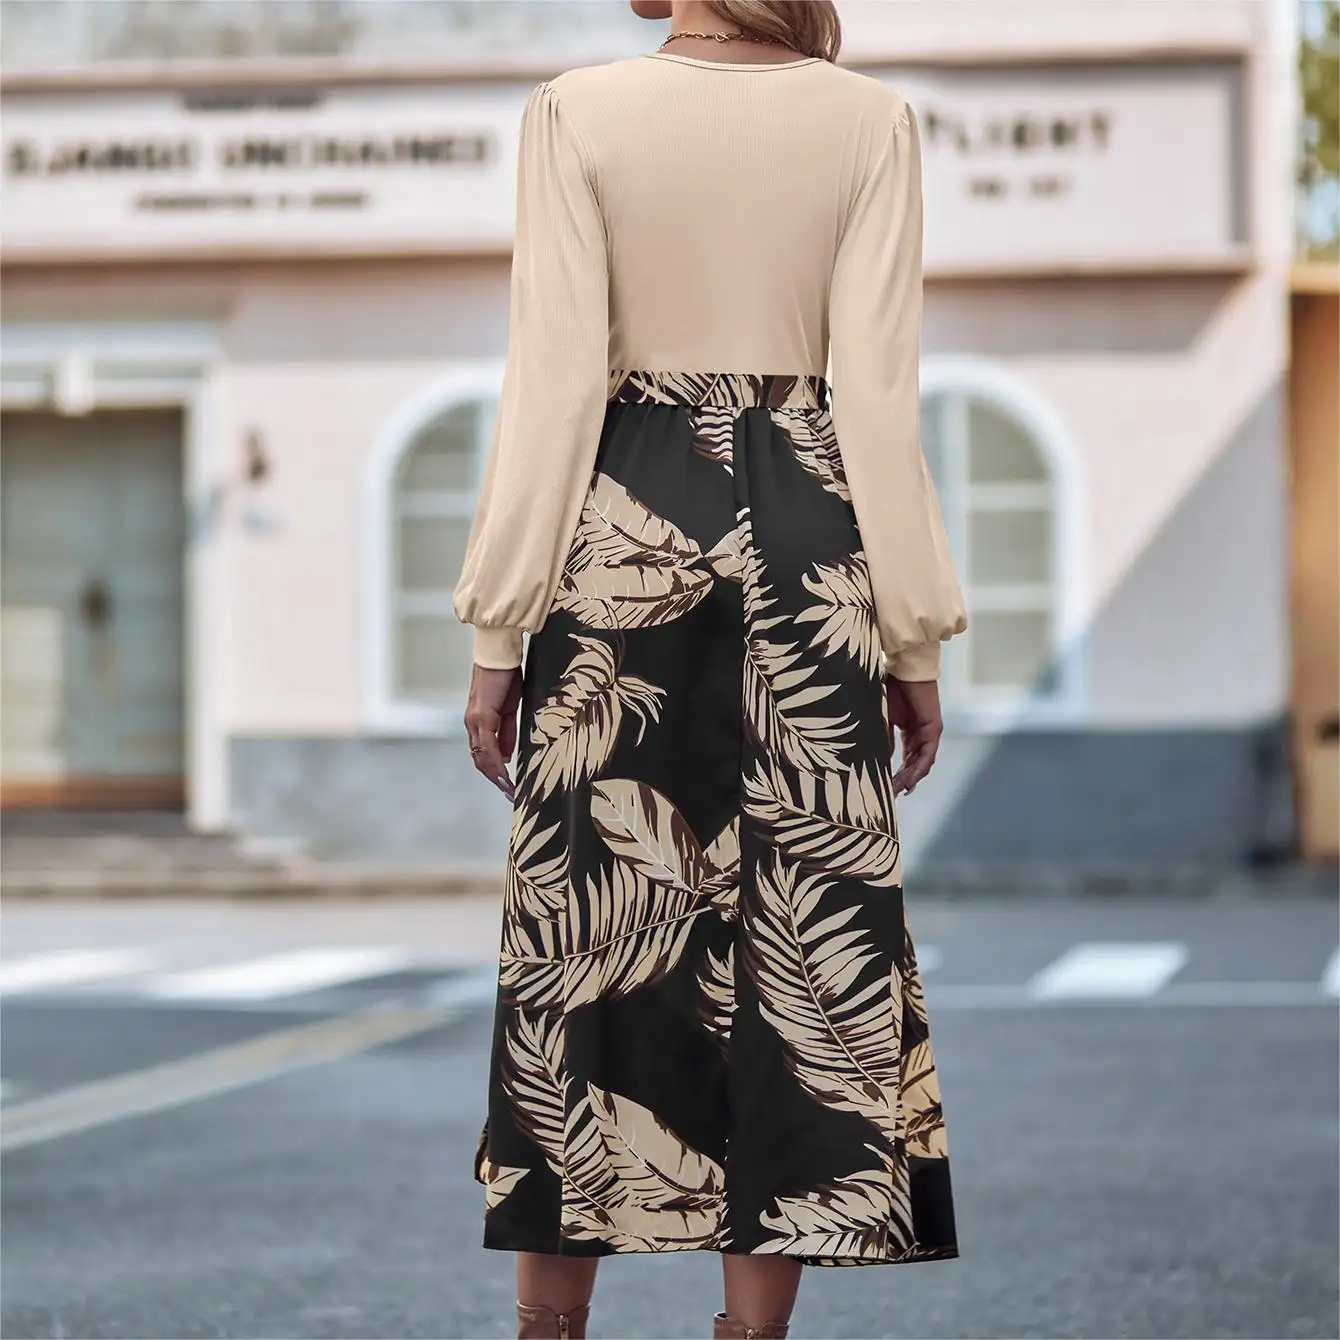 Hot Sell Woman's Lace Up Tunic Draped Tropical Leaf Print Vintage Maxi Dresses New Arrival fancy maxi dress with long sleeve mod